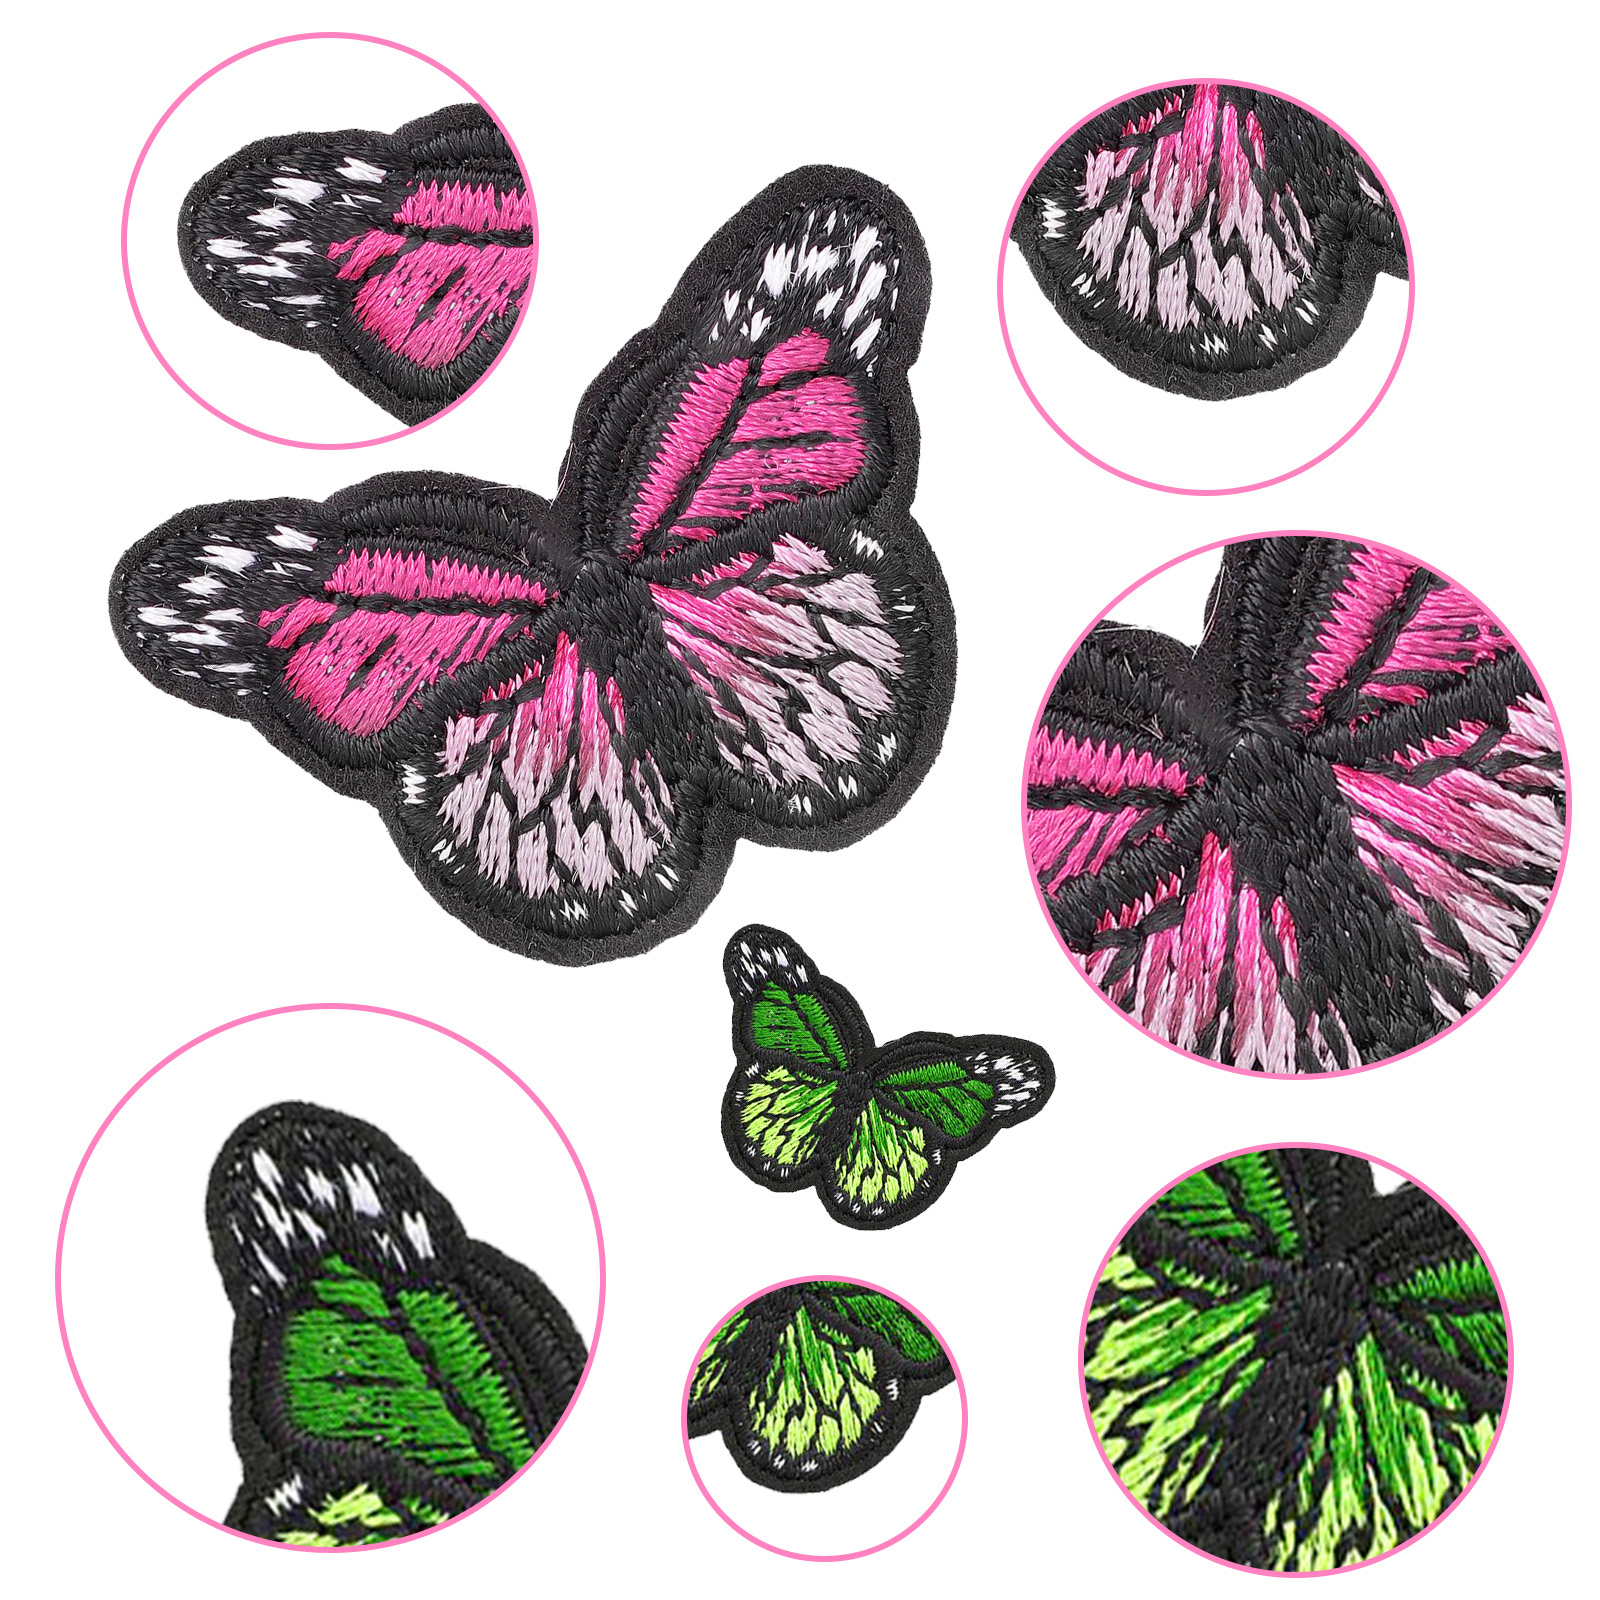 12　Patch　Beautiful　on　Set　Craft　on　12pcs　Applique　TSV　Butterfly　and　Colors,　for　Patches　Iron　Clothing,　DIY　Embroidery　Sewing　with　for　Vivid　Applique　Patches　Bag　Shoes,　Patches　Decor